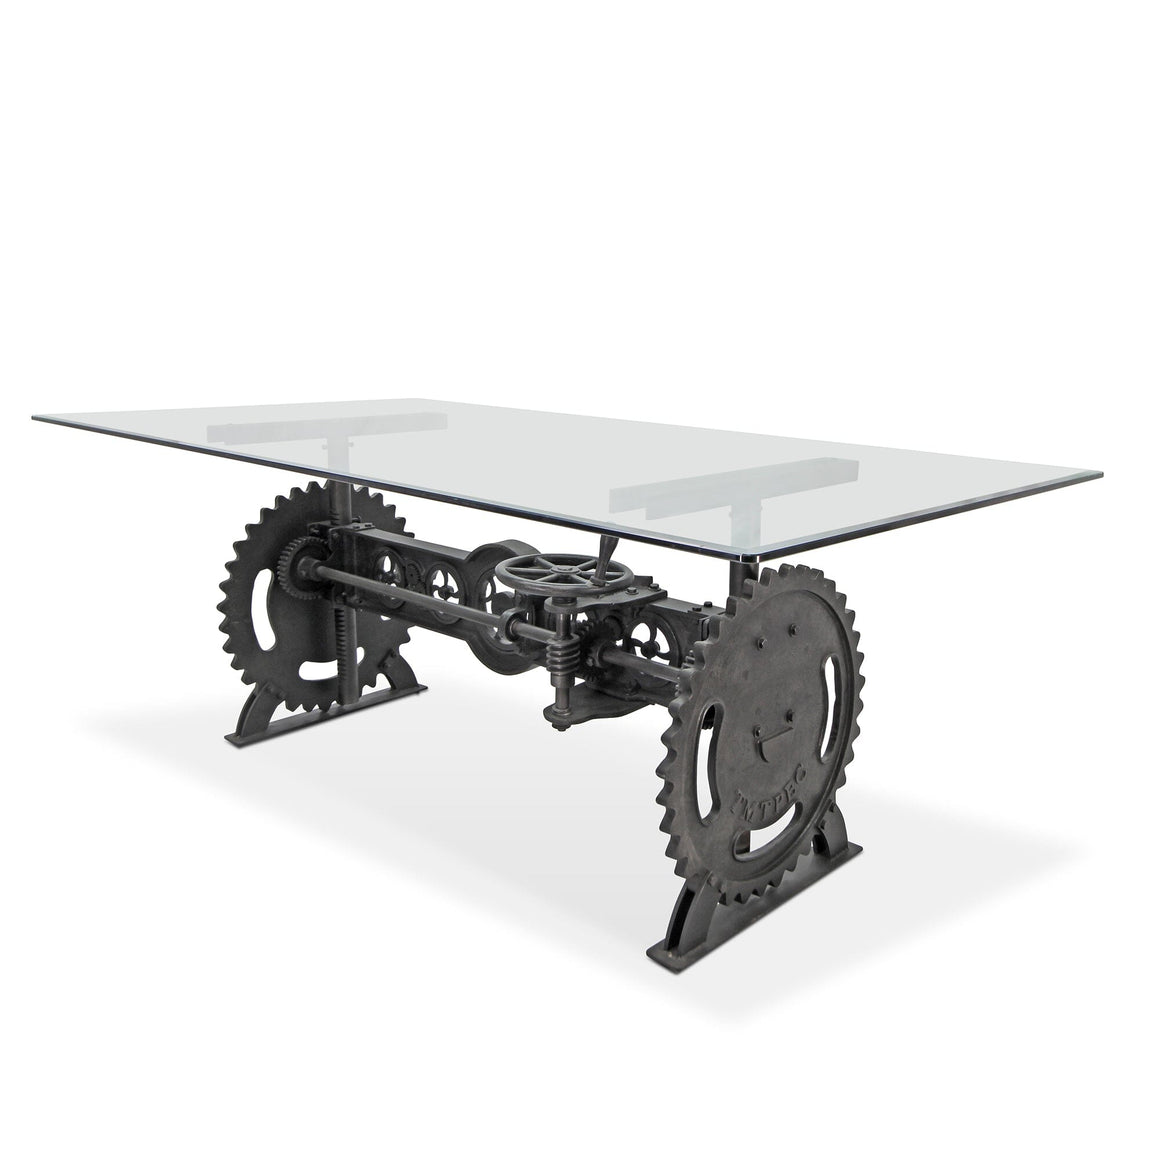 Steampunk Adjustable Dining Table - Iron Crank Base - Glass Top Dining Table Rustic Deco